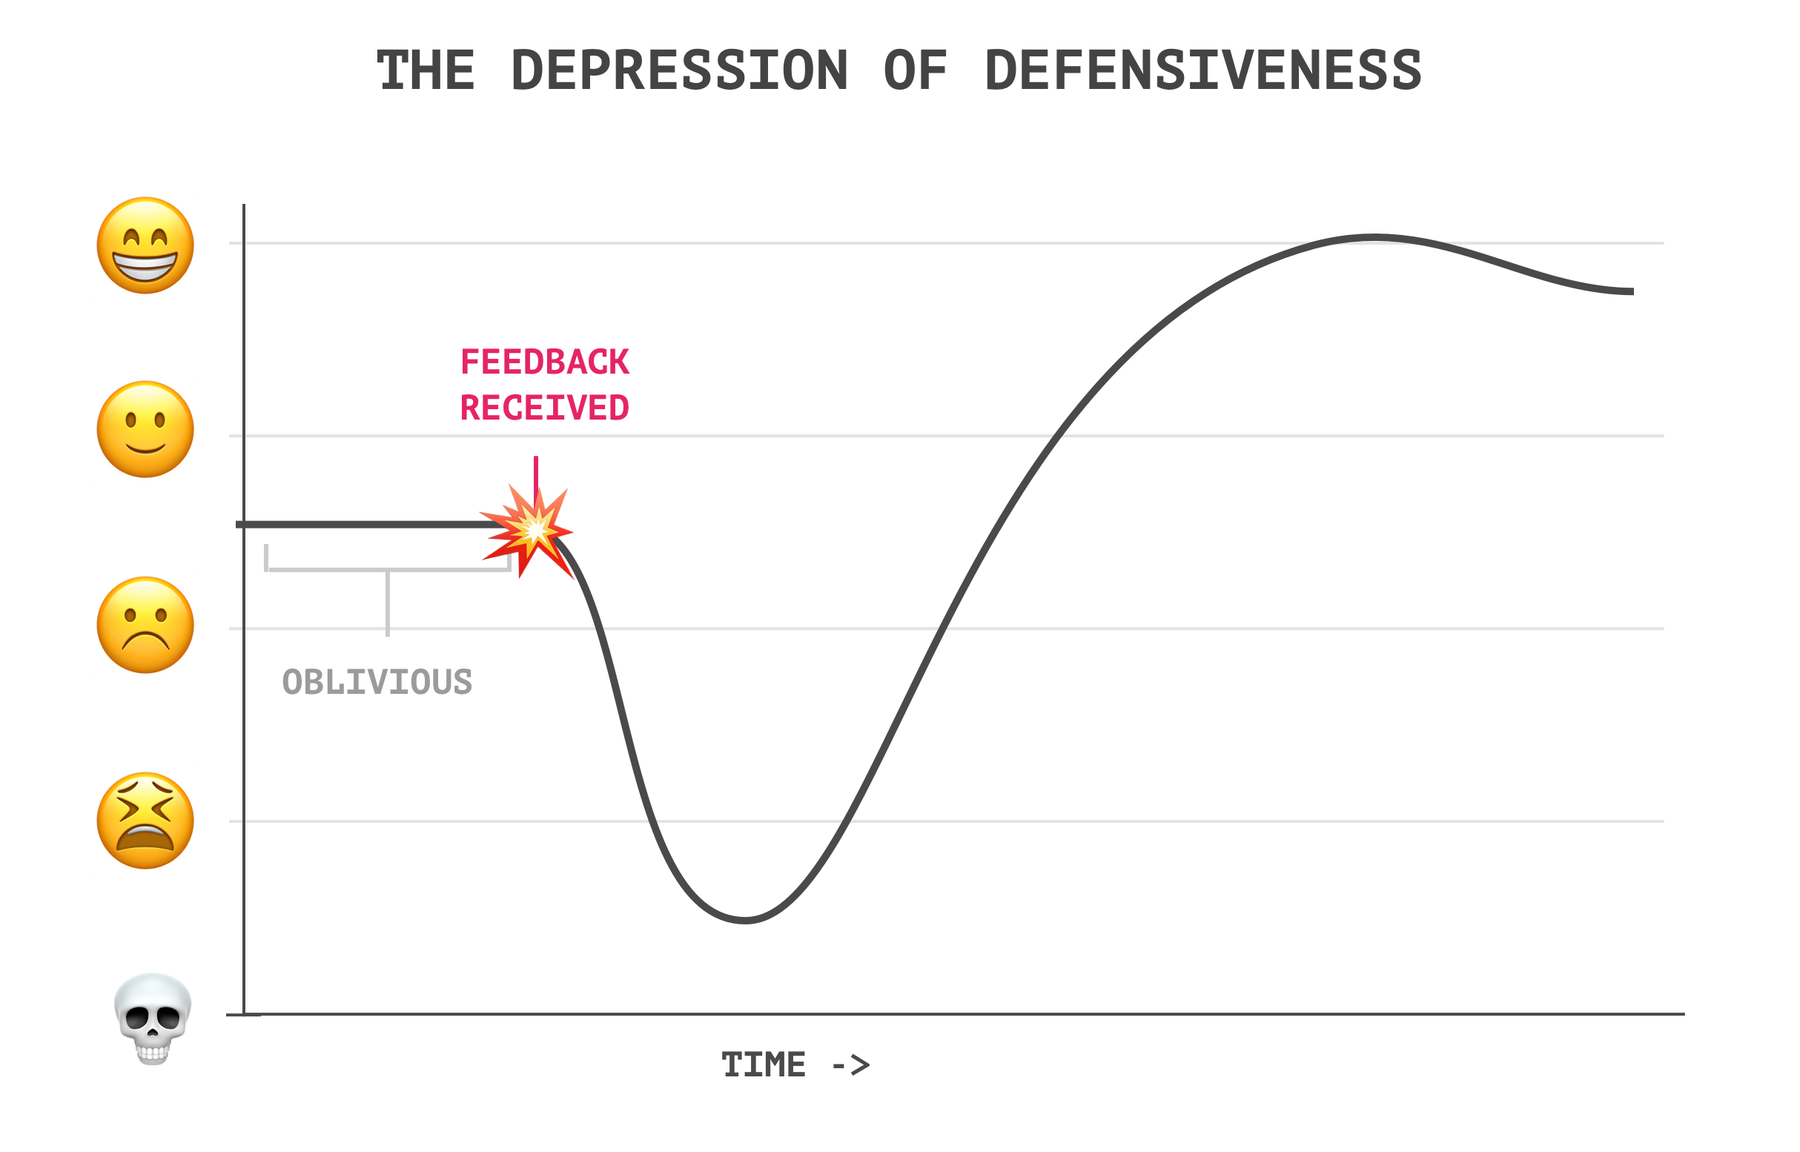 THE DEPRESSION OF DEFENSIVENESS chart showing an explosion at the point of feedback